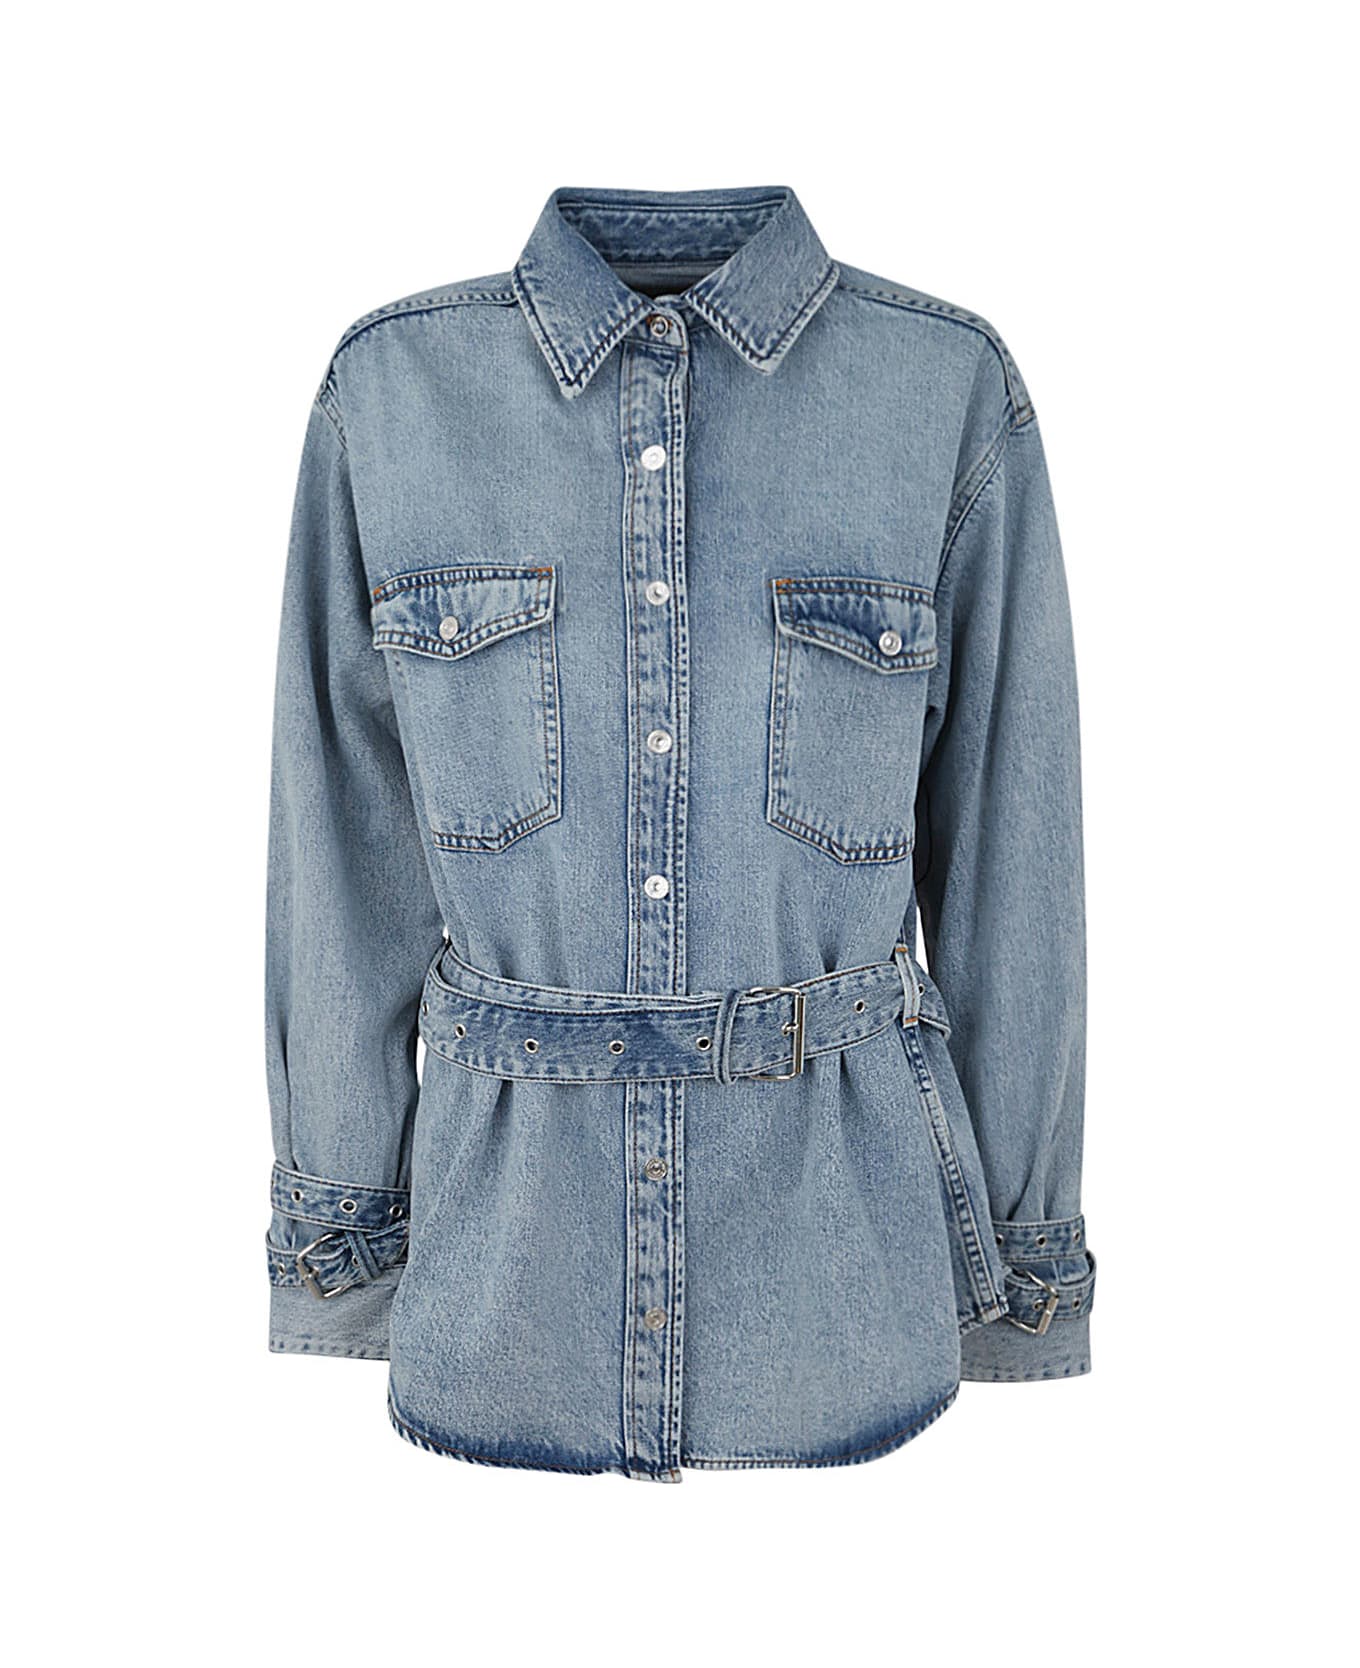 7 For All Mankind Chiara Biasi X 7fam Belted Overshirt Unwind - Light Blue シャツ